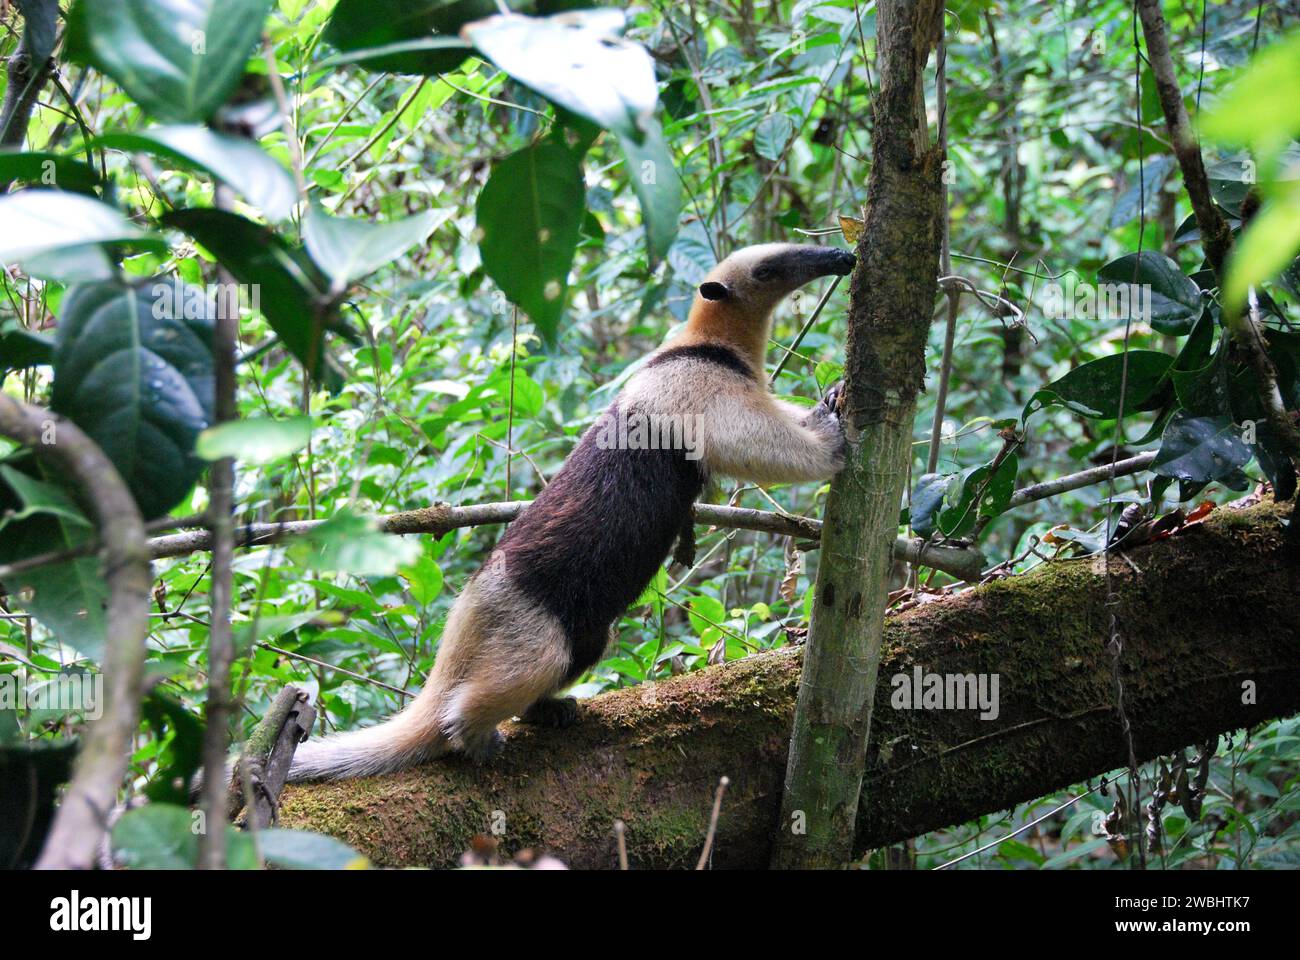 A closeup of an Anteater perched on a branch of a tree in a jungle Stock Photo